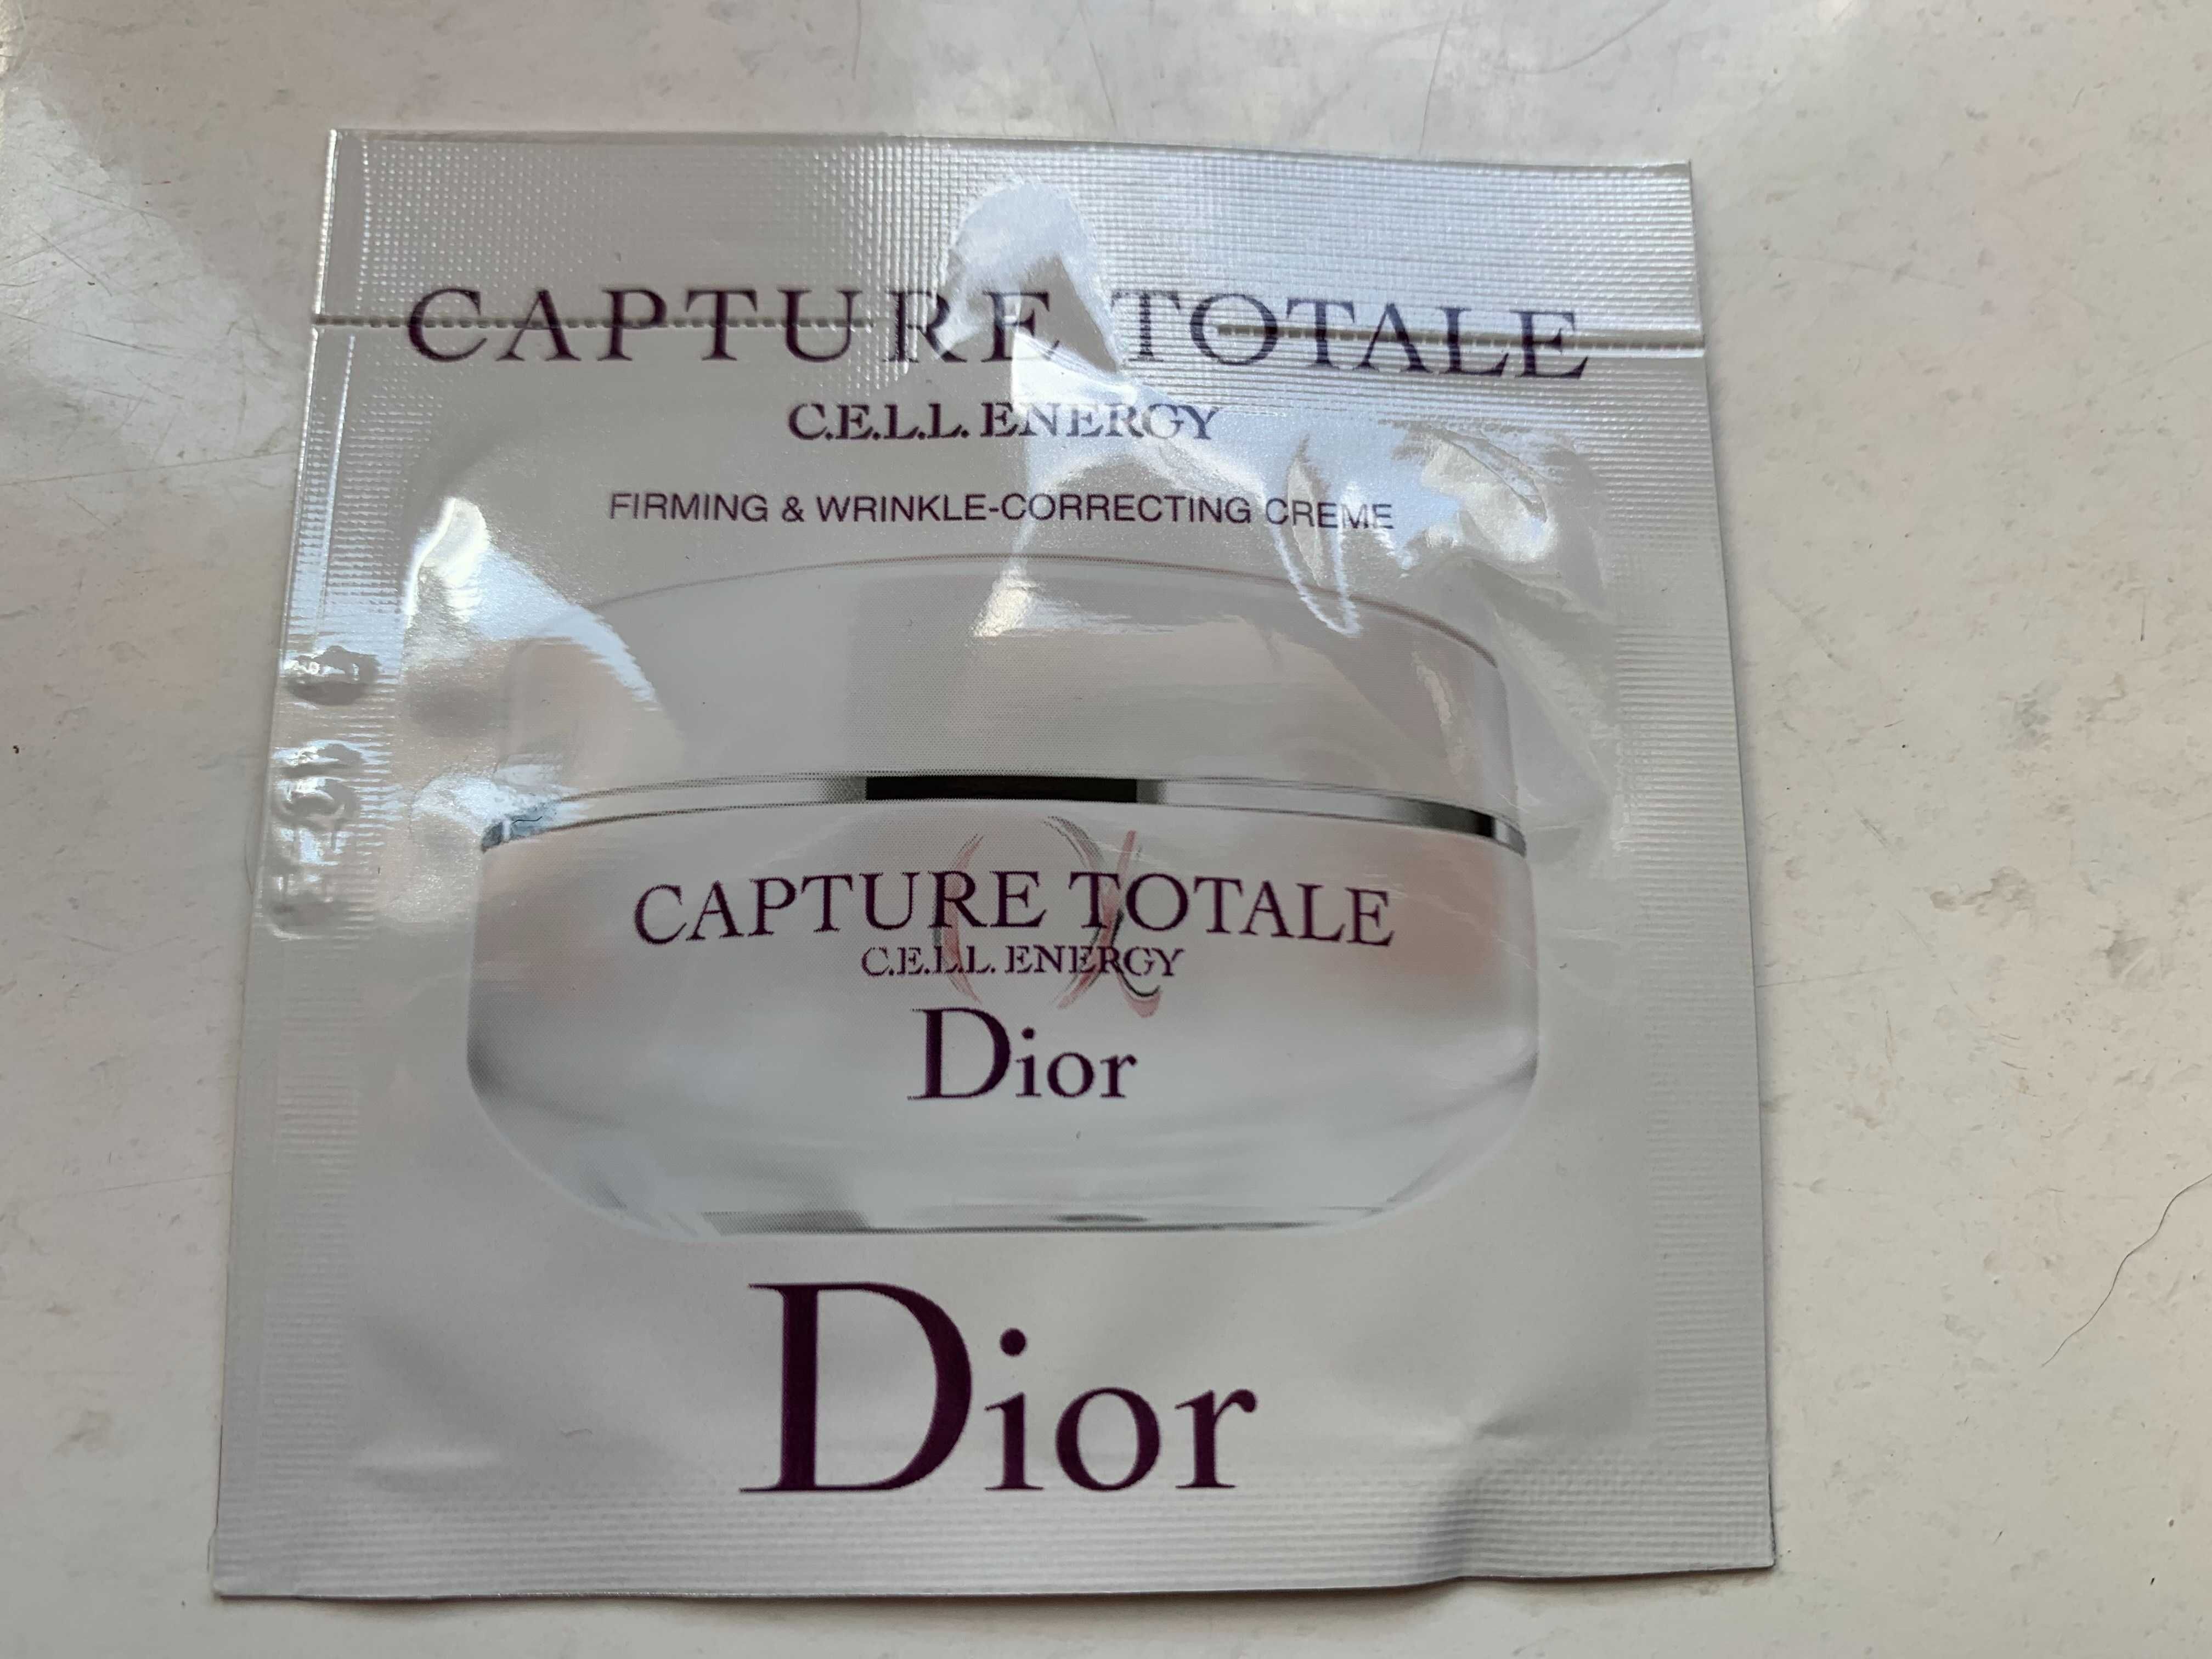 DIOR Capture Totale C.E.L.L. Energy - Firming & Wrinkle-Correcting